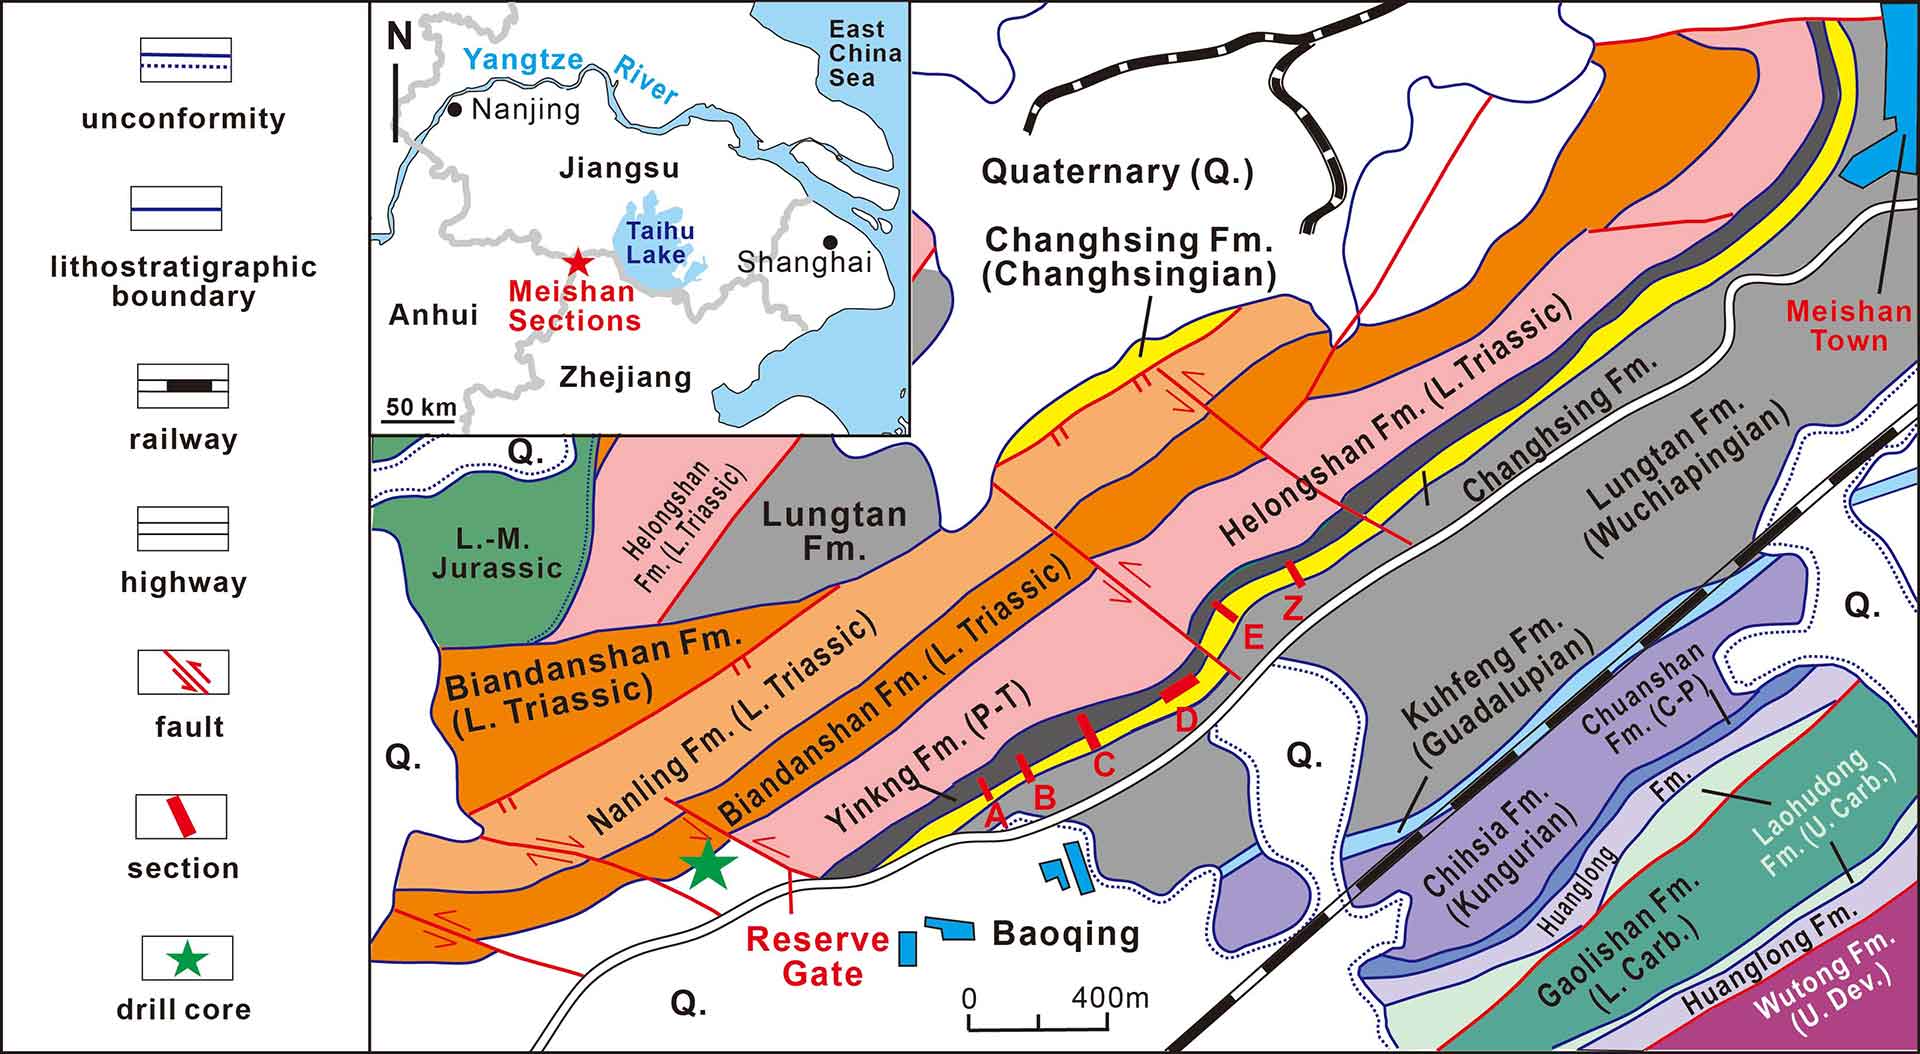 Geological map of the Meishan area